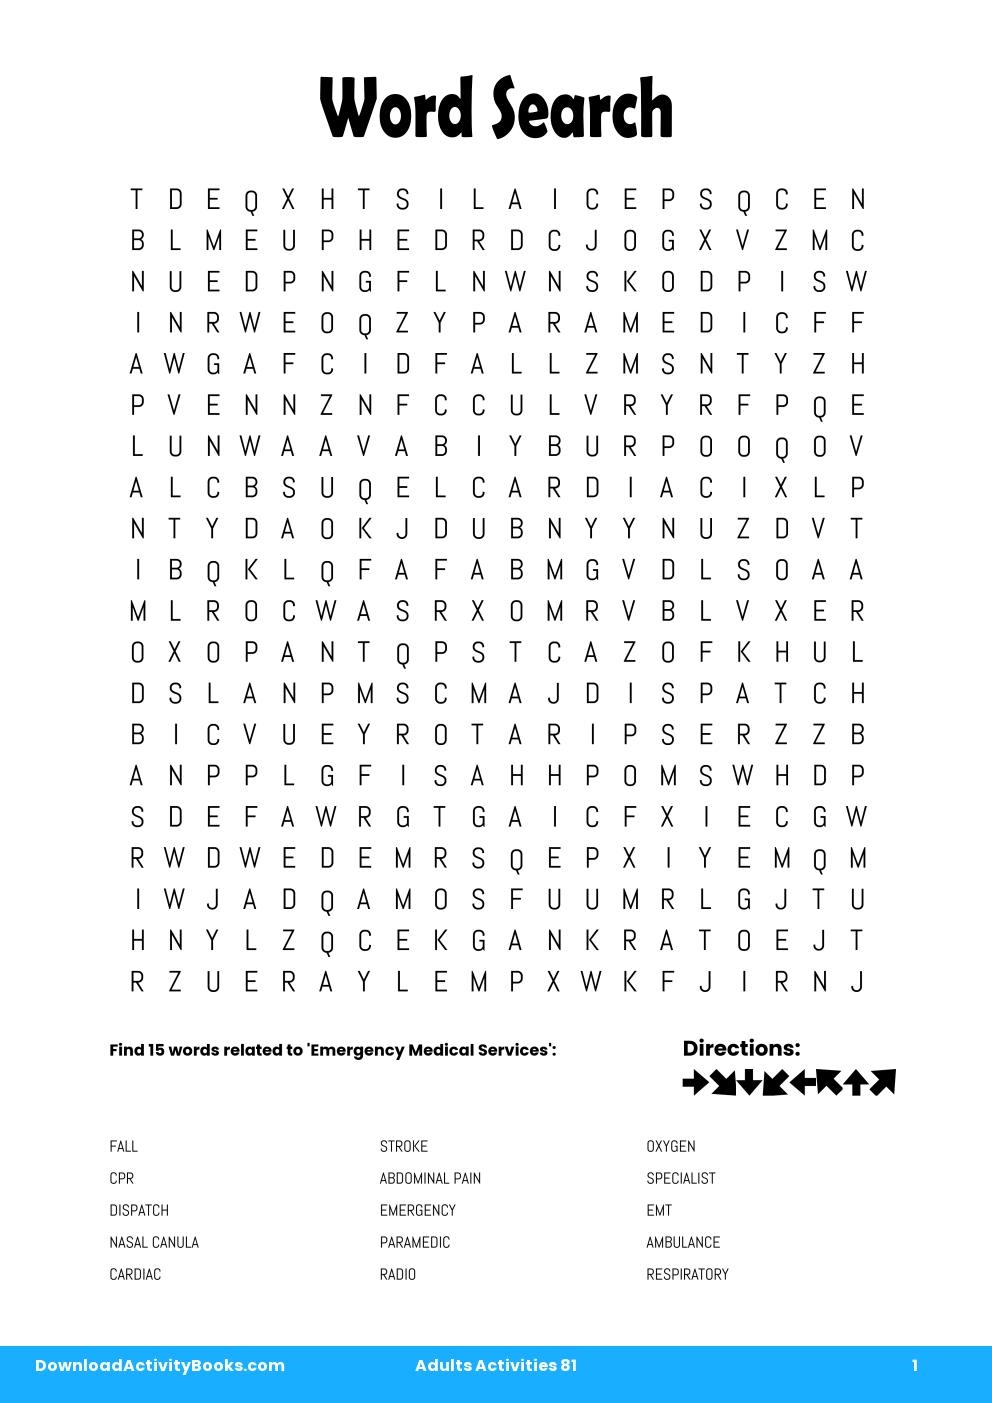 Word Search in Adults Activities 81